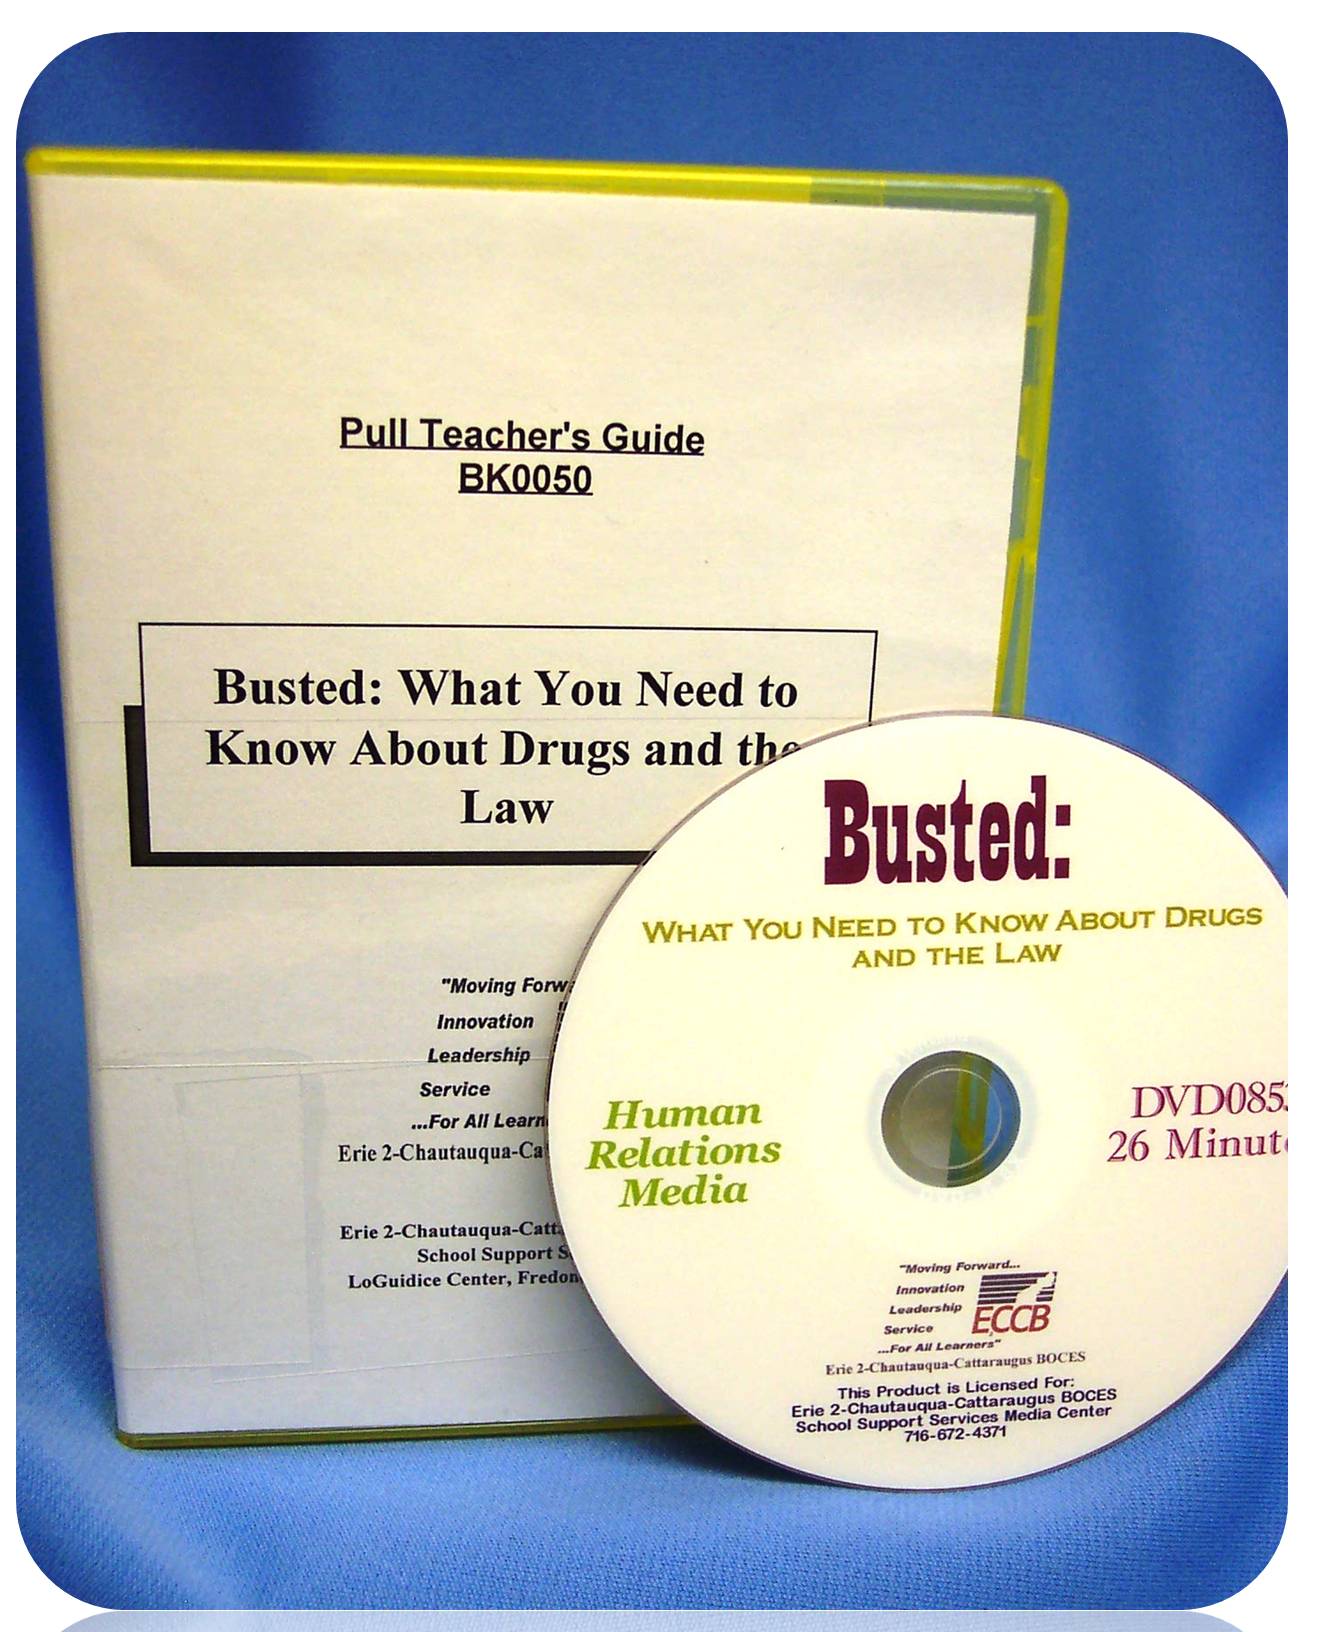 Busted: What You Need to Know About Drugs and the Law